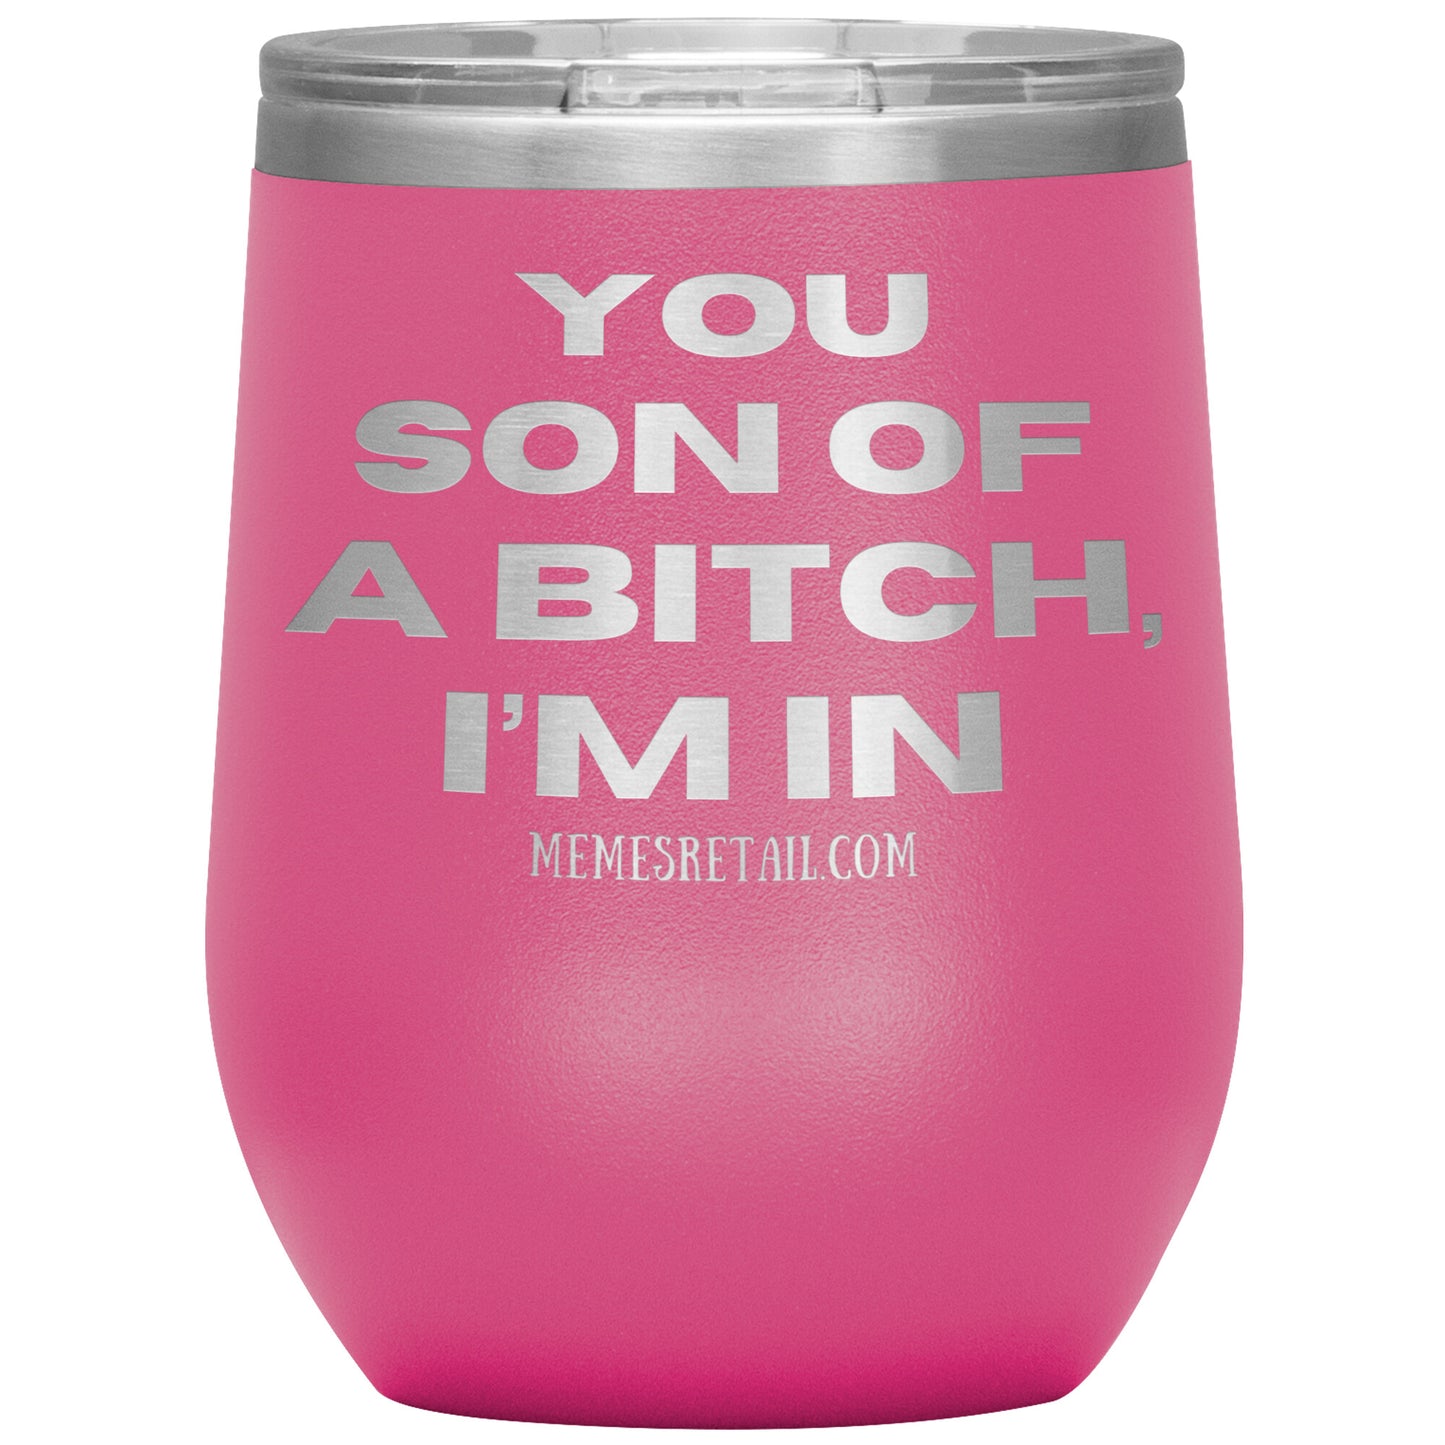 You son of a bitch, I’m in Tumblers, 12oz Wine Insulated Tumbler / Pink - MemesRetail.com